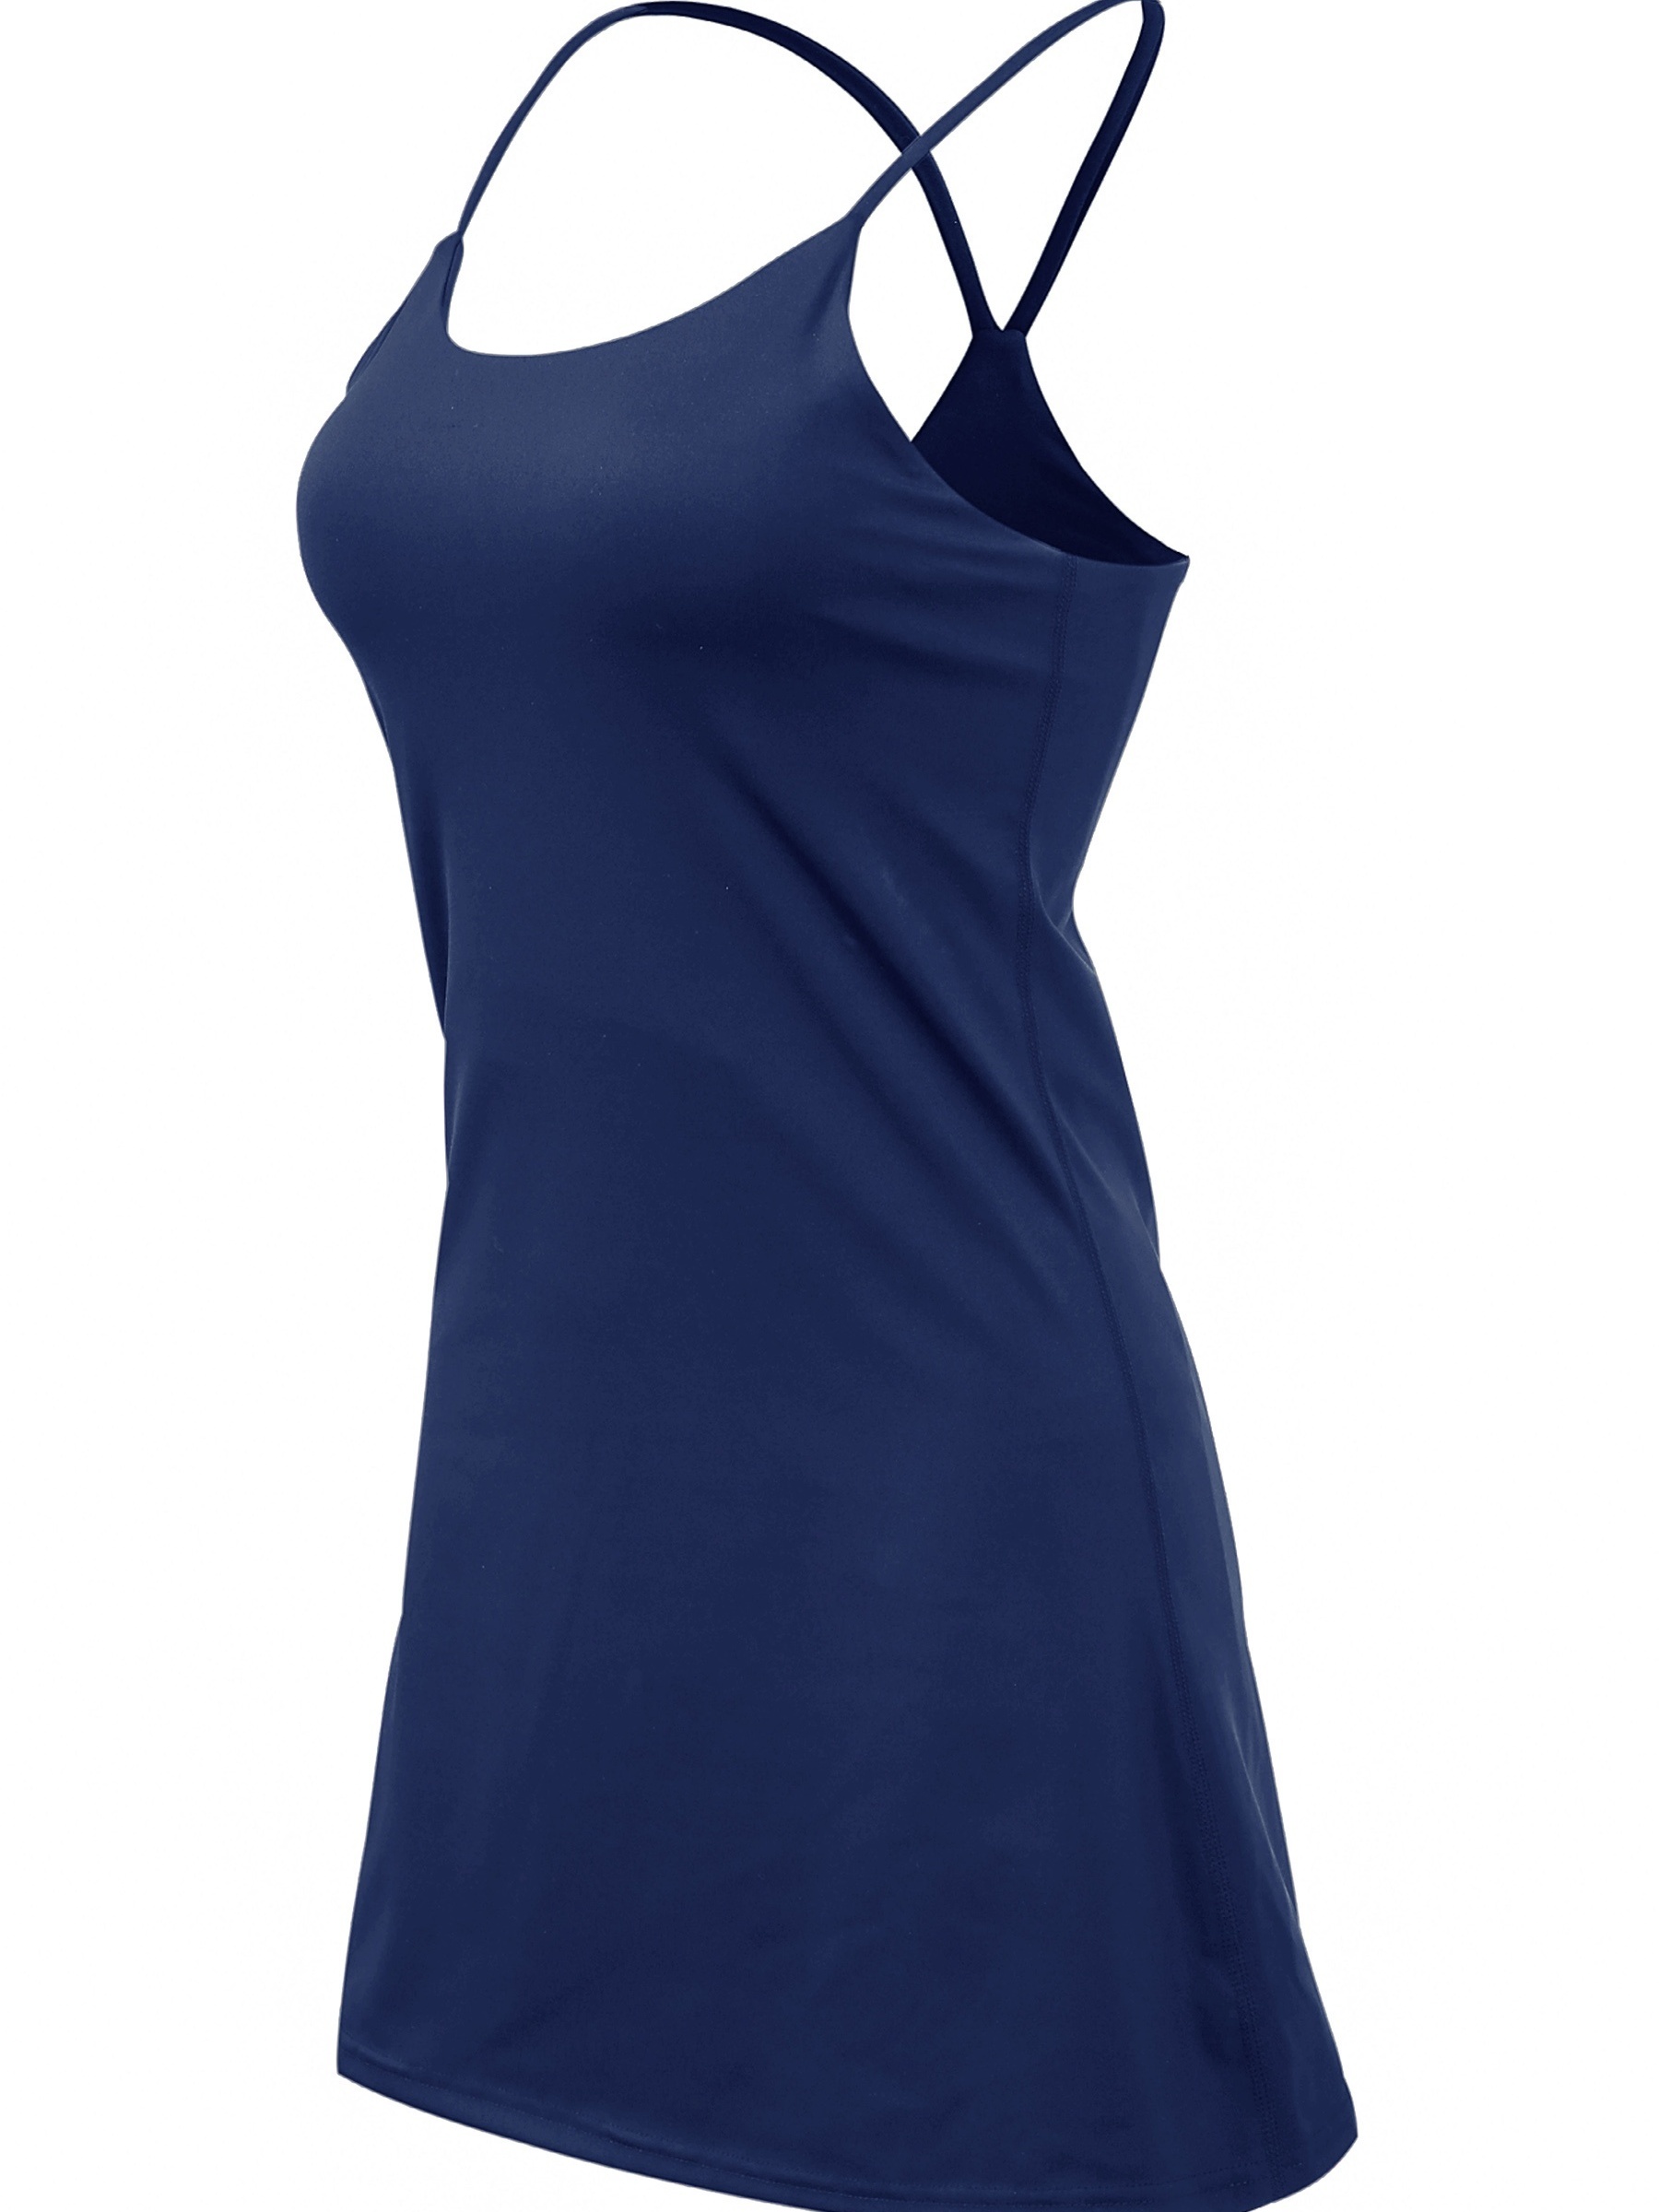 Womens Tennis Dress, Workout Dress with Built-in Bra & Shorts Pockets  Exercise Dress for Golf Athletic Dresses for Women 